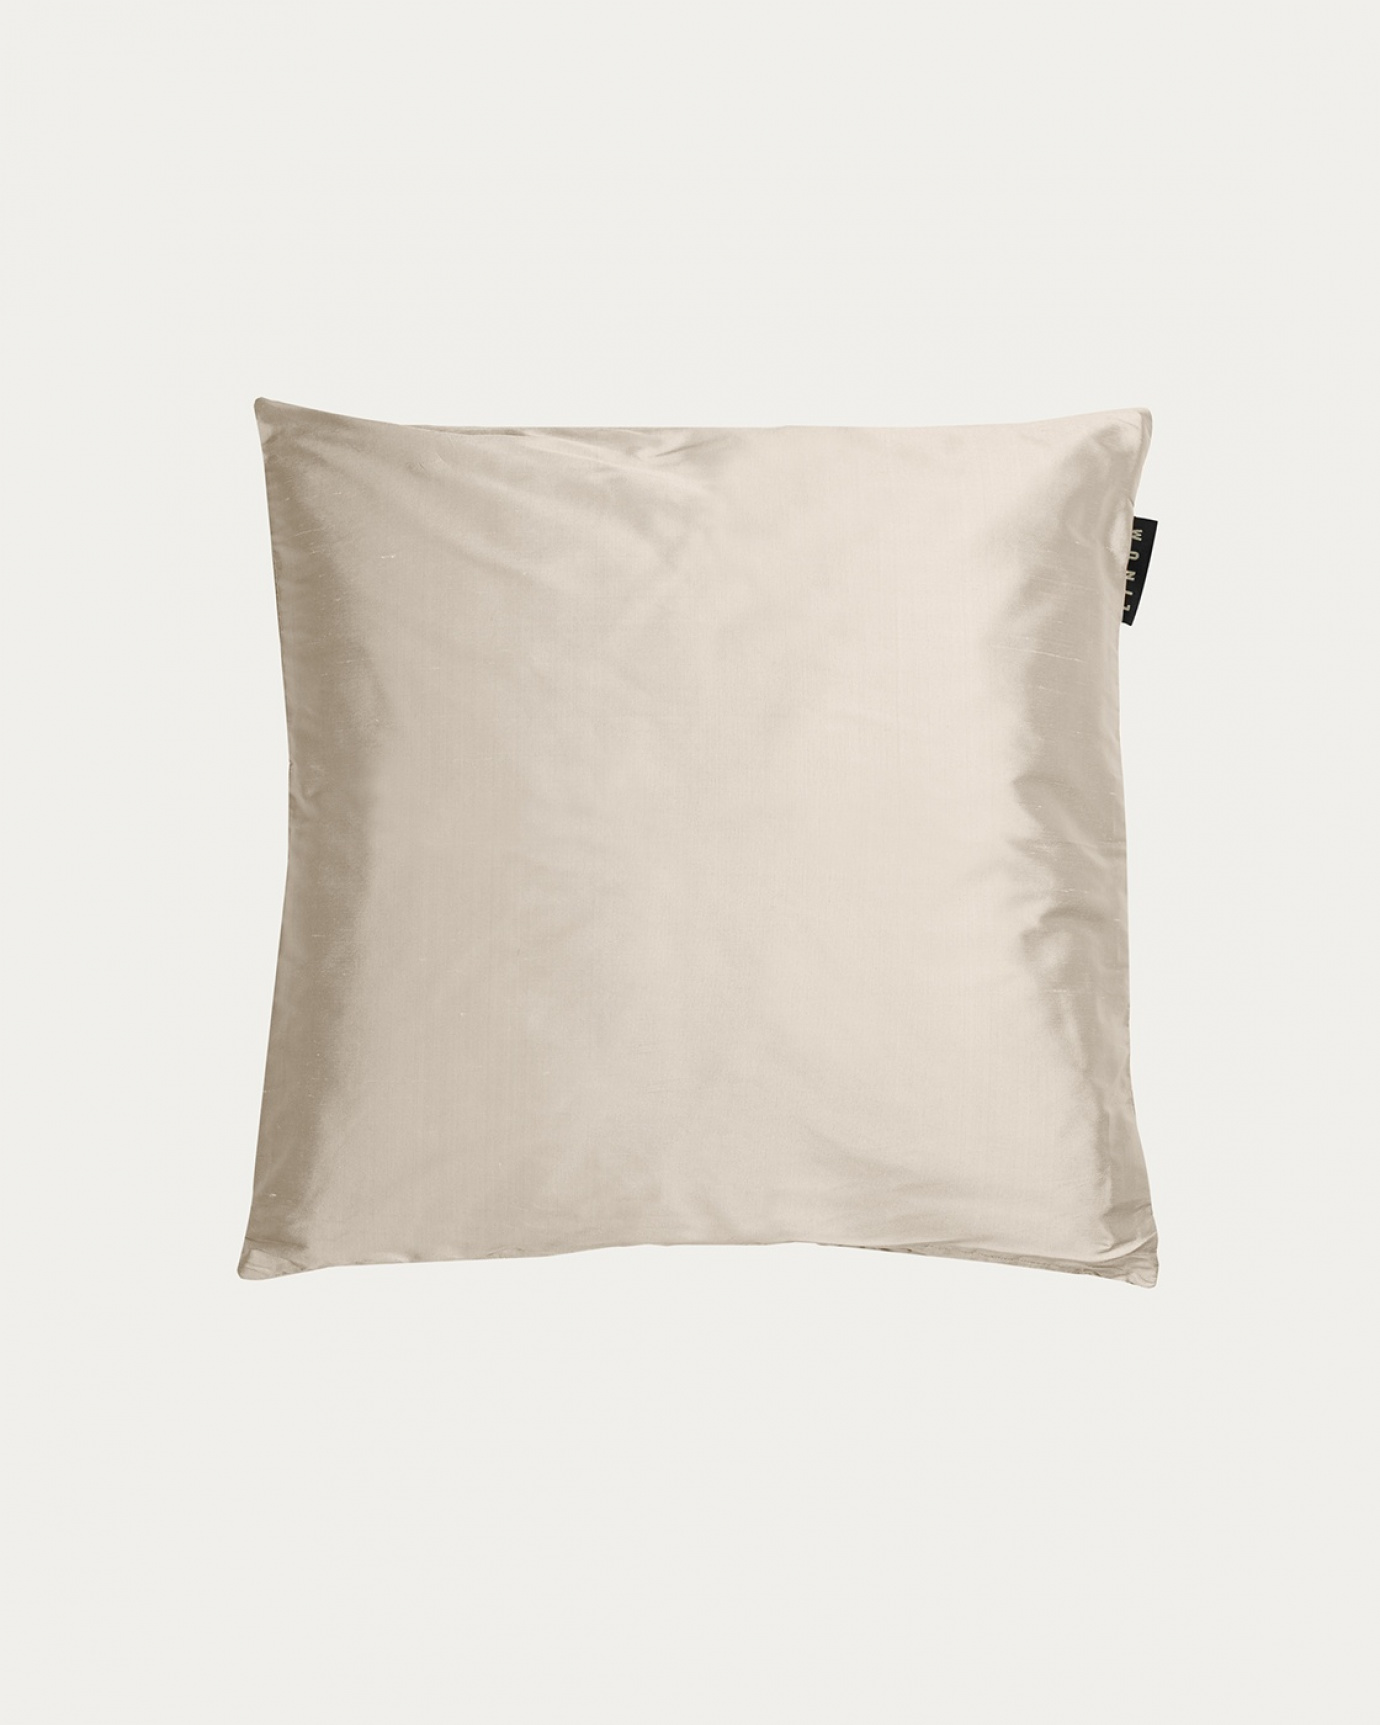 Product image light beige SILK cushion cover made of 100% dupion silk that gives a nice lustre from LINUM DESIGN. Size 40x40 cm.